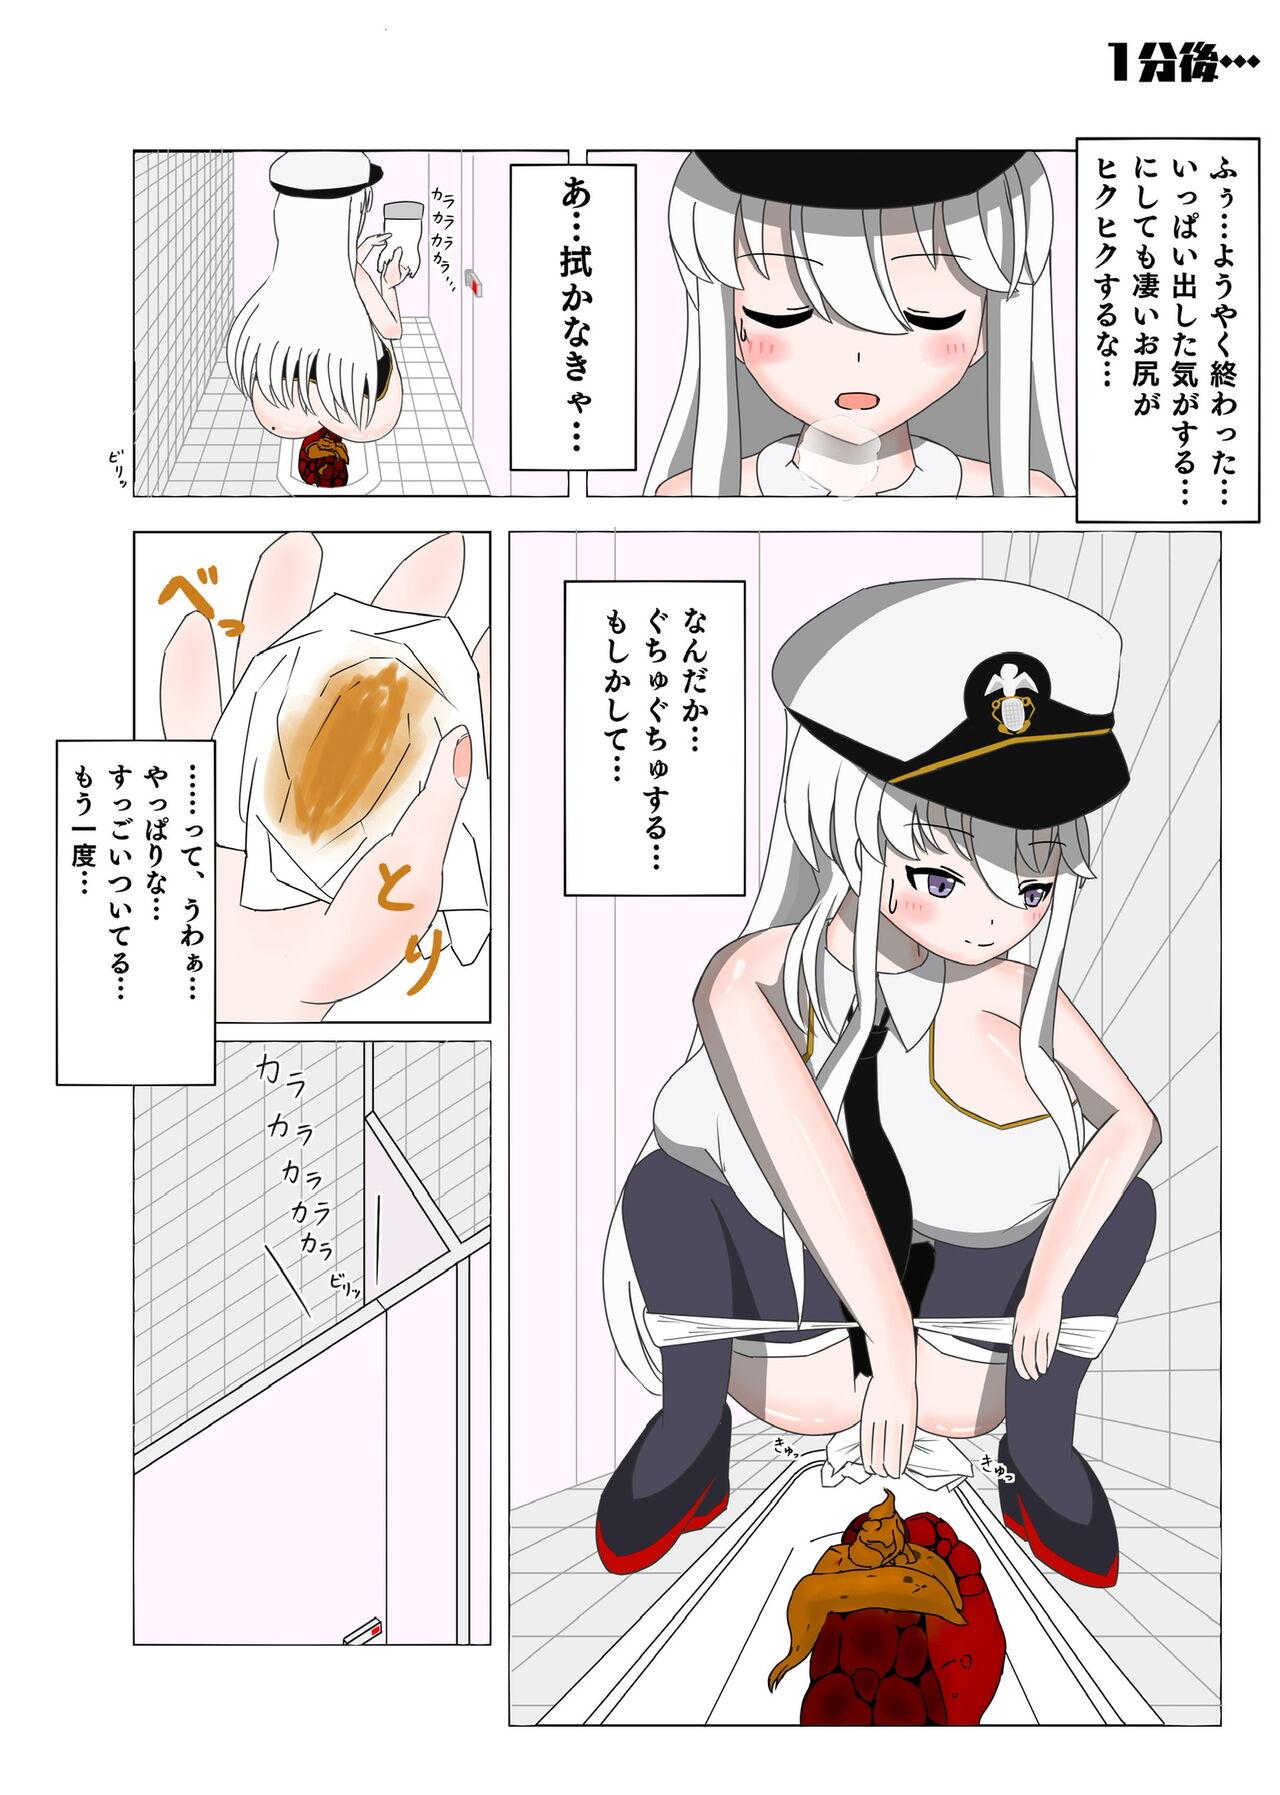 A manga in which Enterprise relieves 3 days' worth of poop in a Japanese-style toilet 12